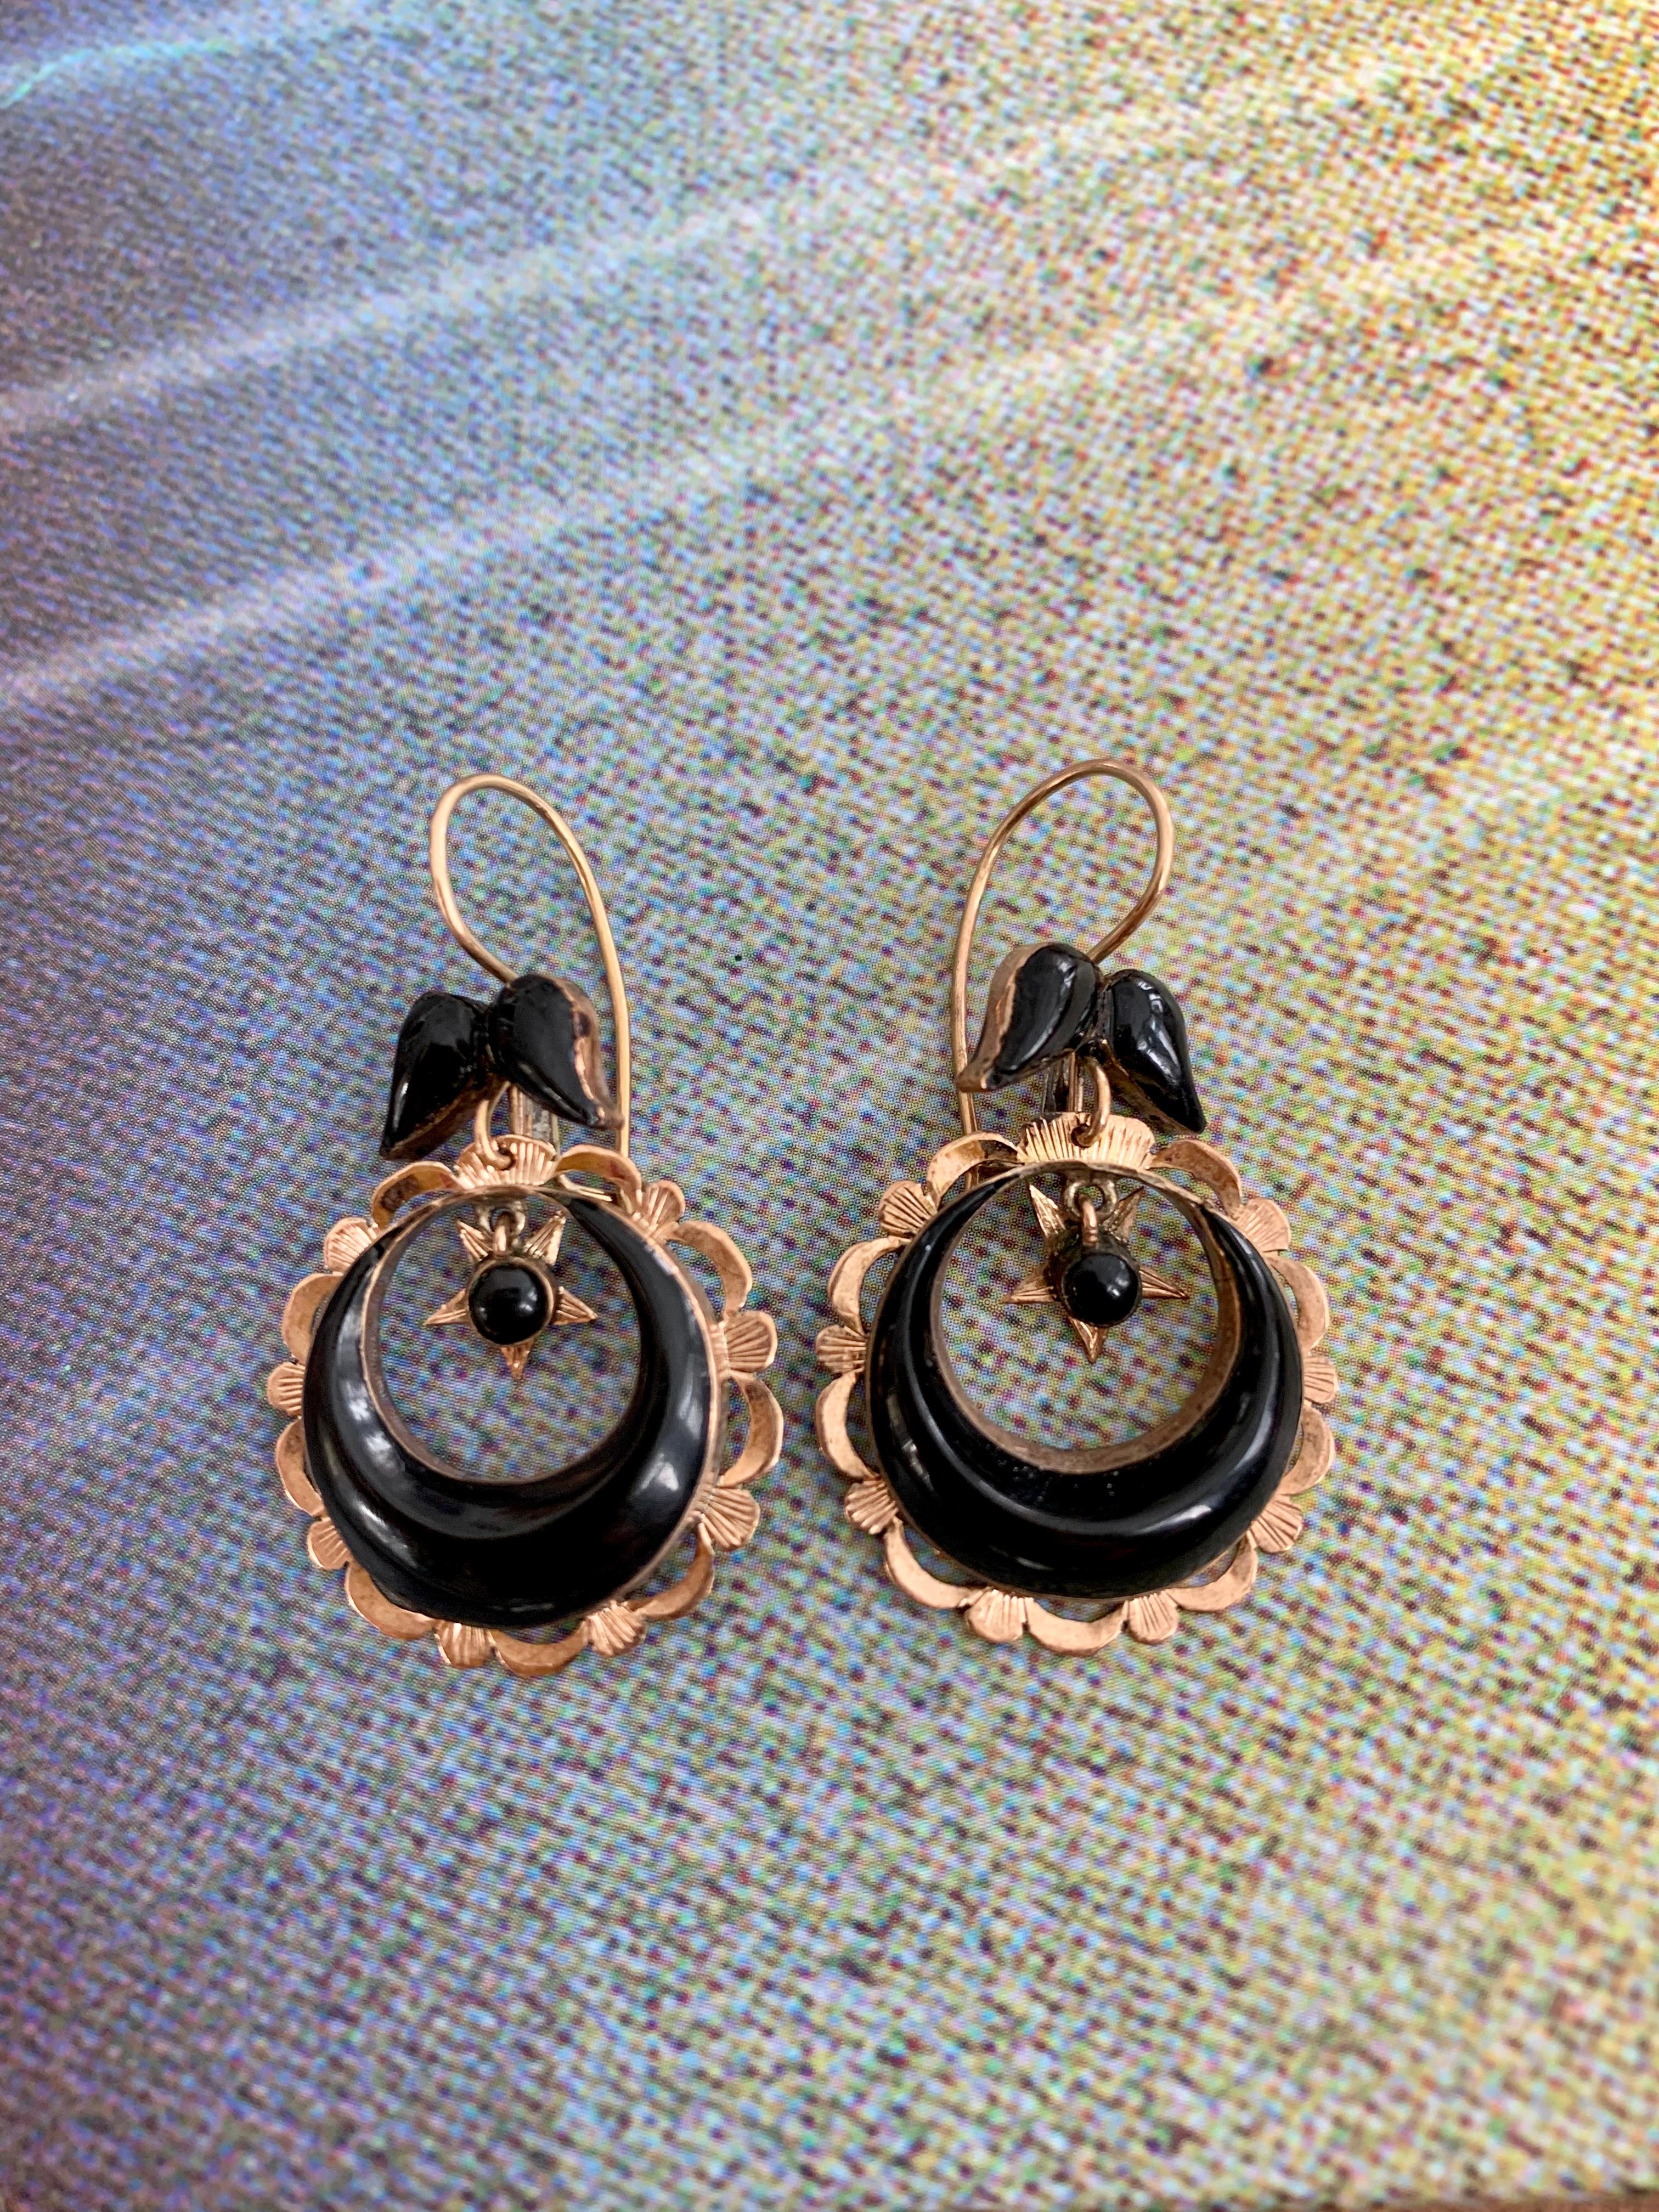 These vintage earrings are 1920s-1930s era and feature a circle of black Onyx which is surrounded by 14 karat yellow Gold. There is a star hanging inside the the circle.  Inside the star there is a cabochon black Onyx.  The ear wires are also